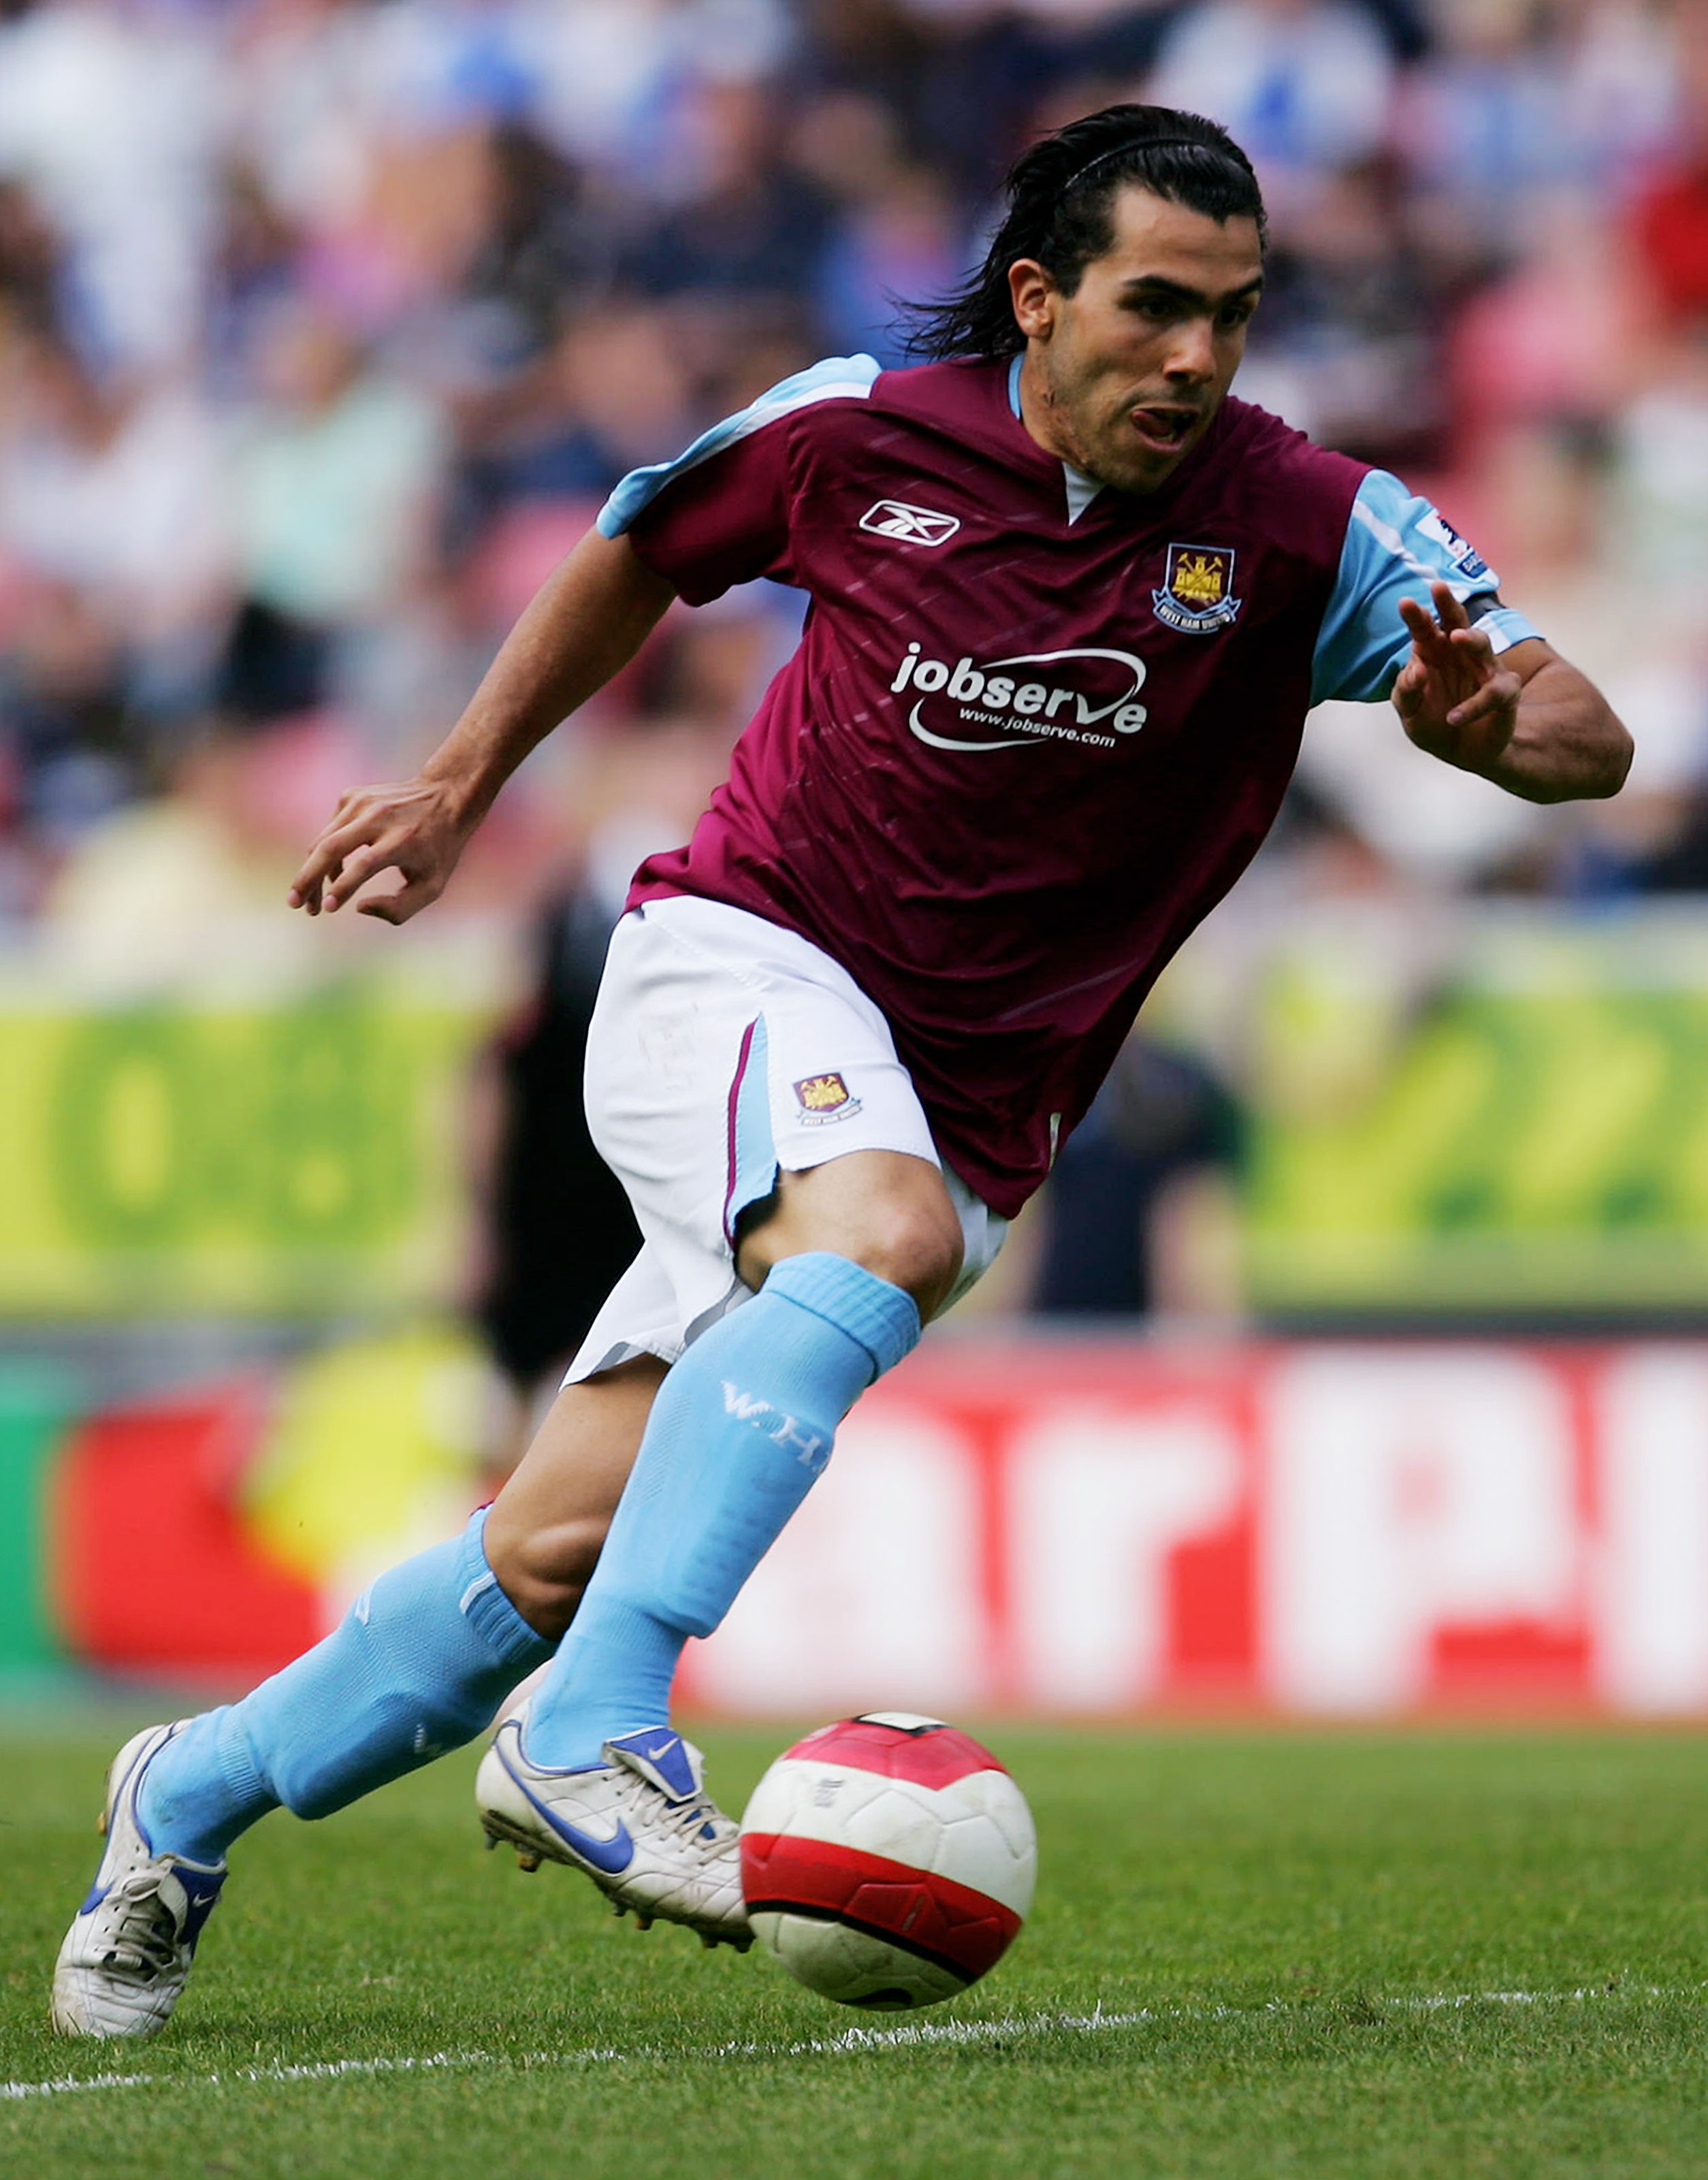 WIGAN, UNITED KINGDOM - APRIL 28:  Carlos Tevez of West Ham in action during the Barclays Premiership match between Wigan Athletic and West Ham United at The JJB Stadium on April 28, 2007 in Wigan, England.  (Photo by Gary M. Prior/Getty Images)